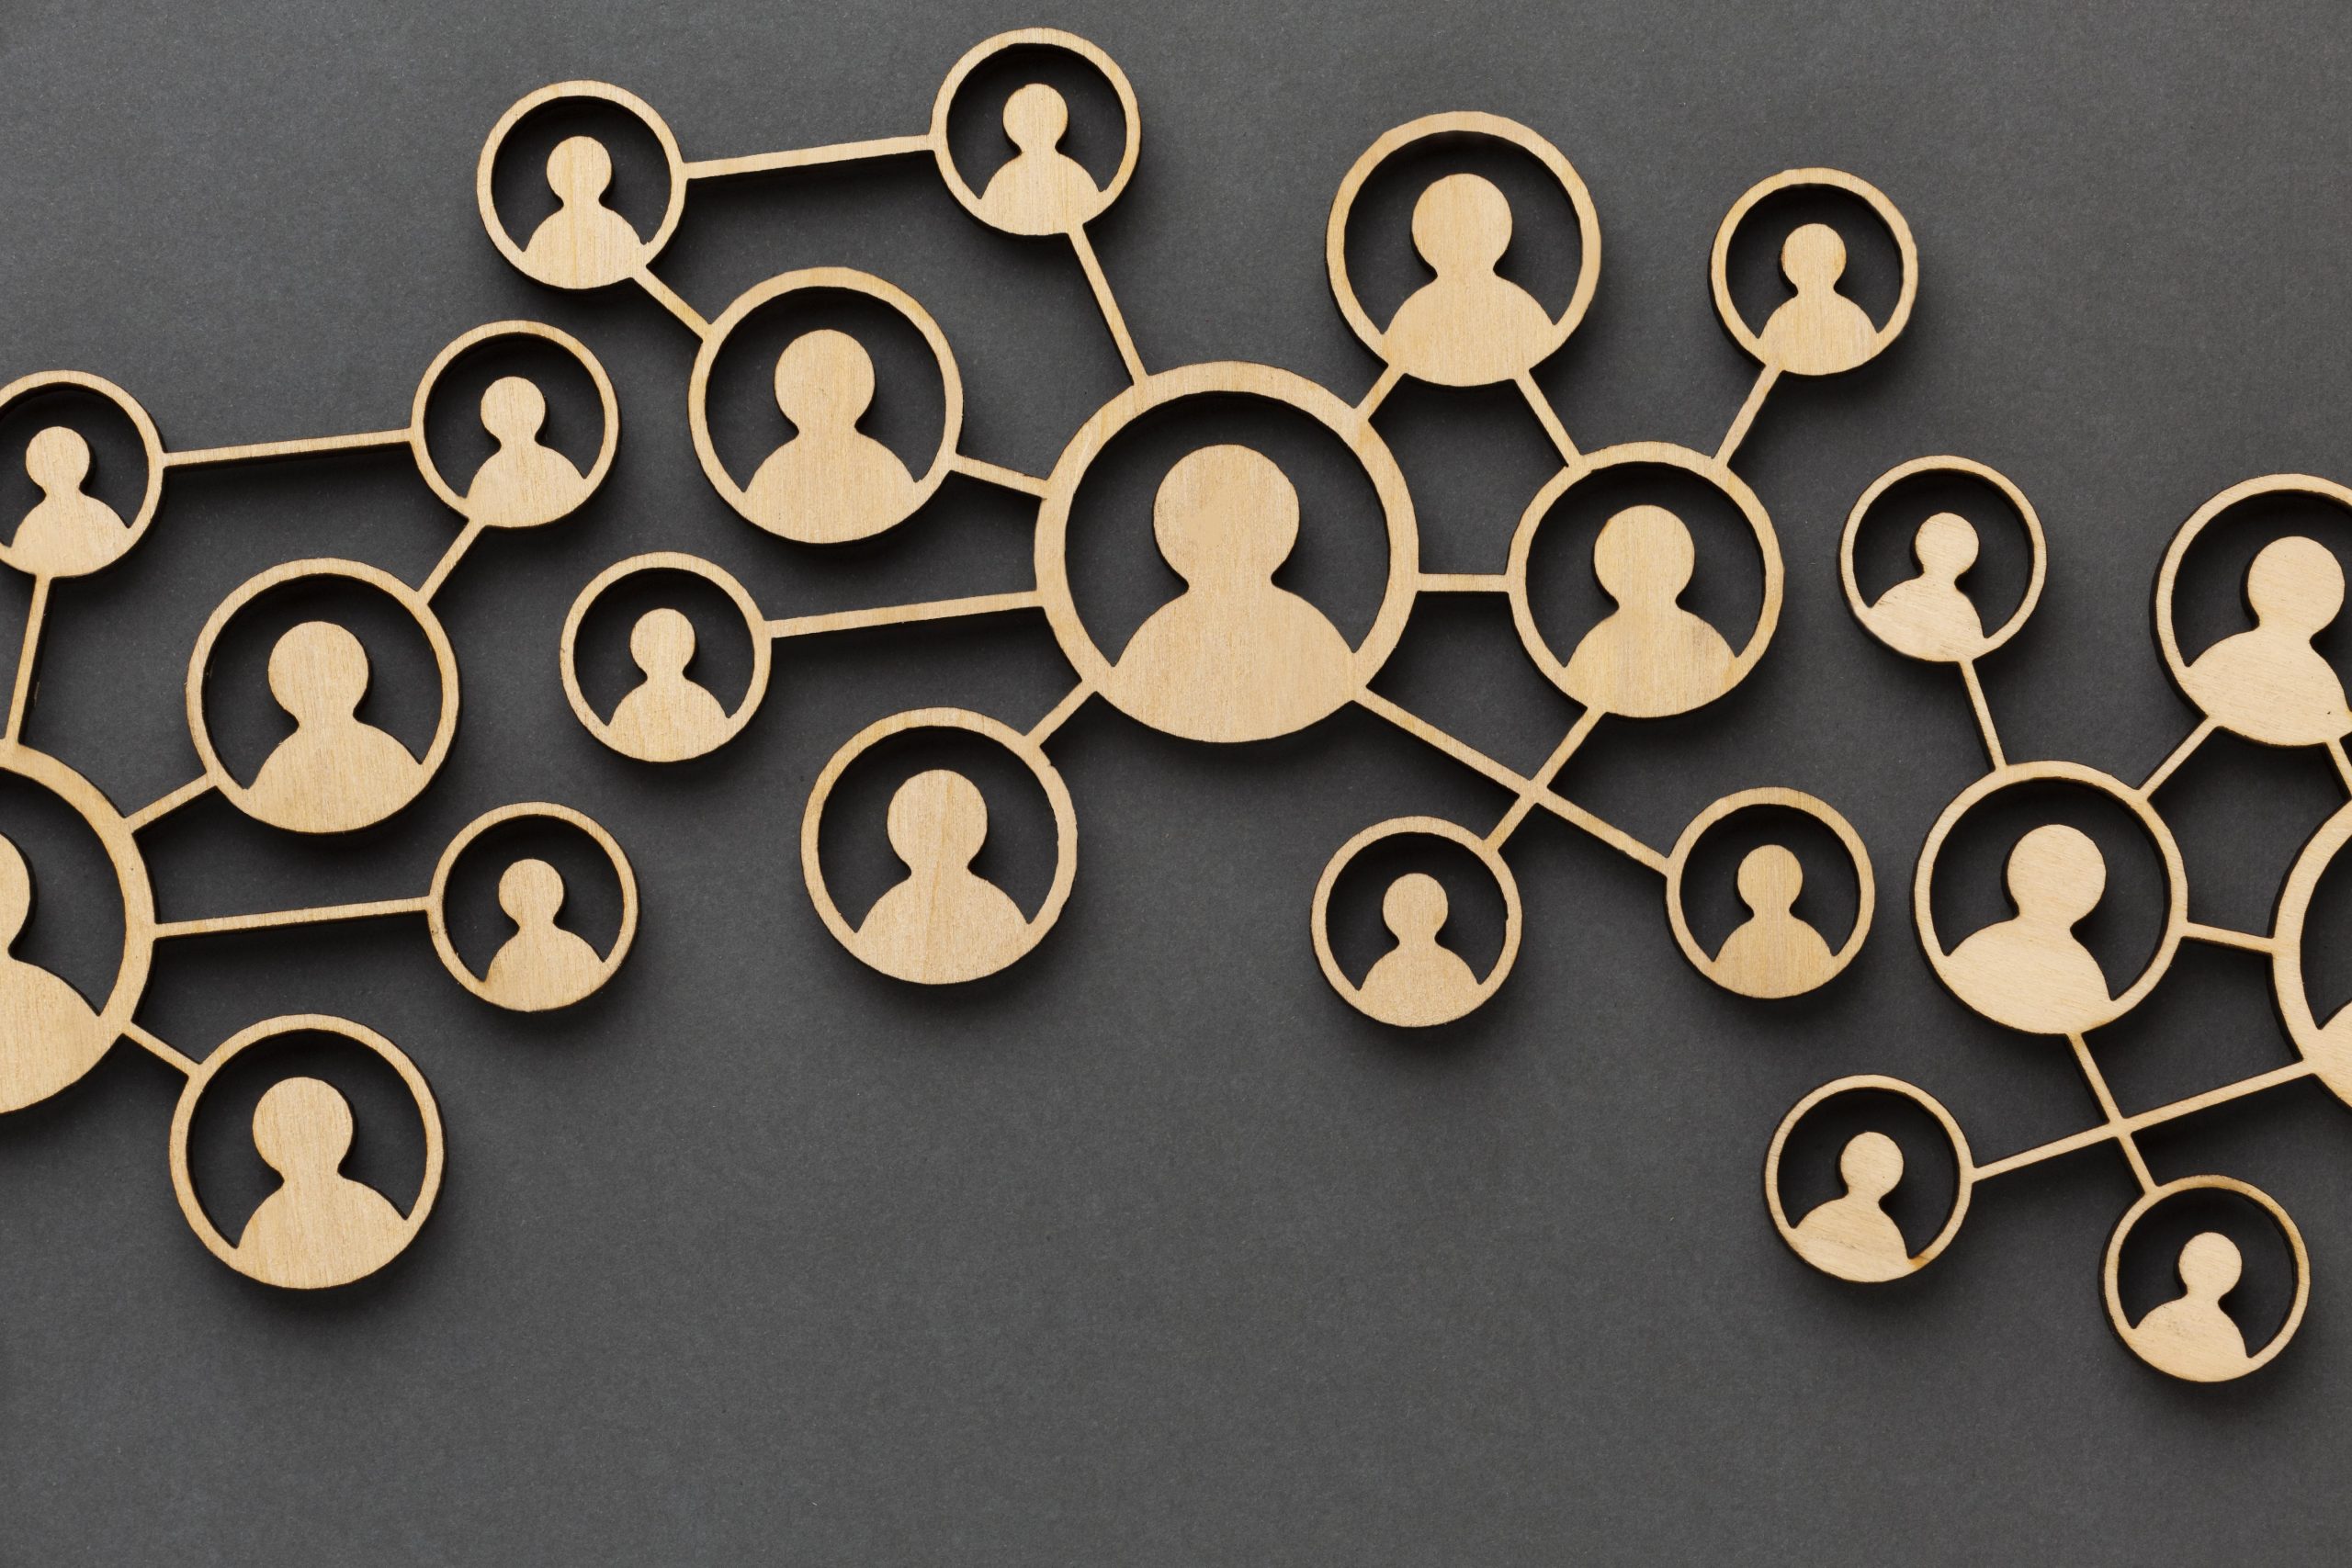 people networking concept made in wood